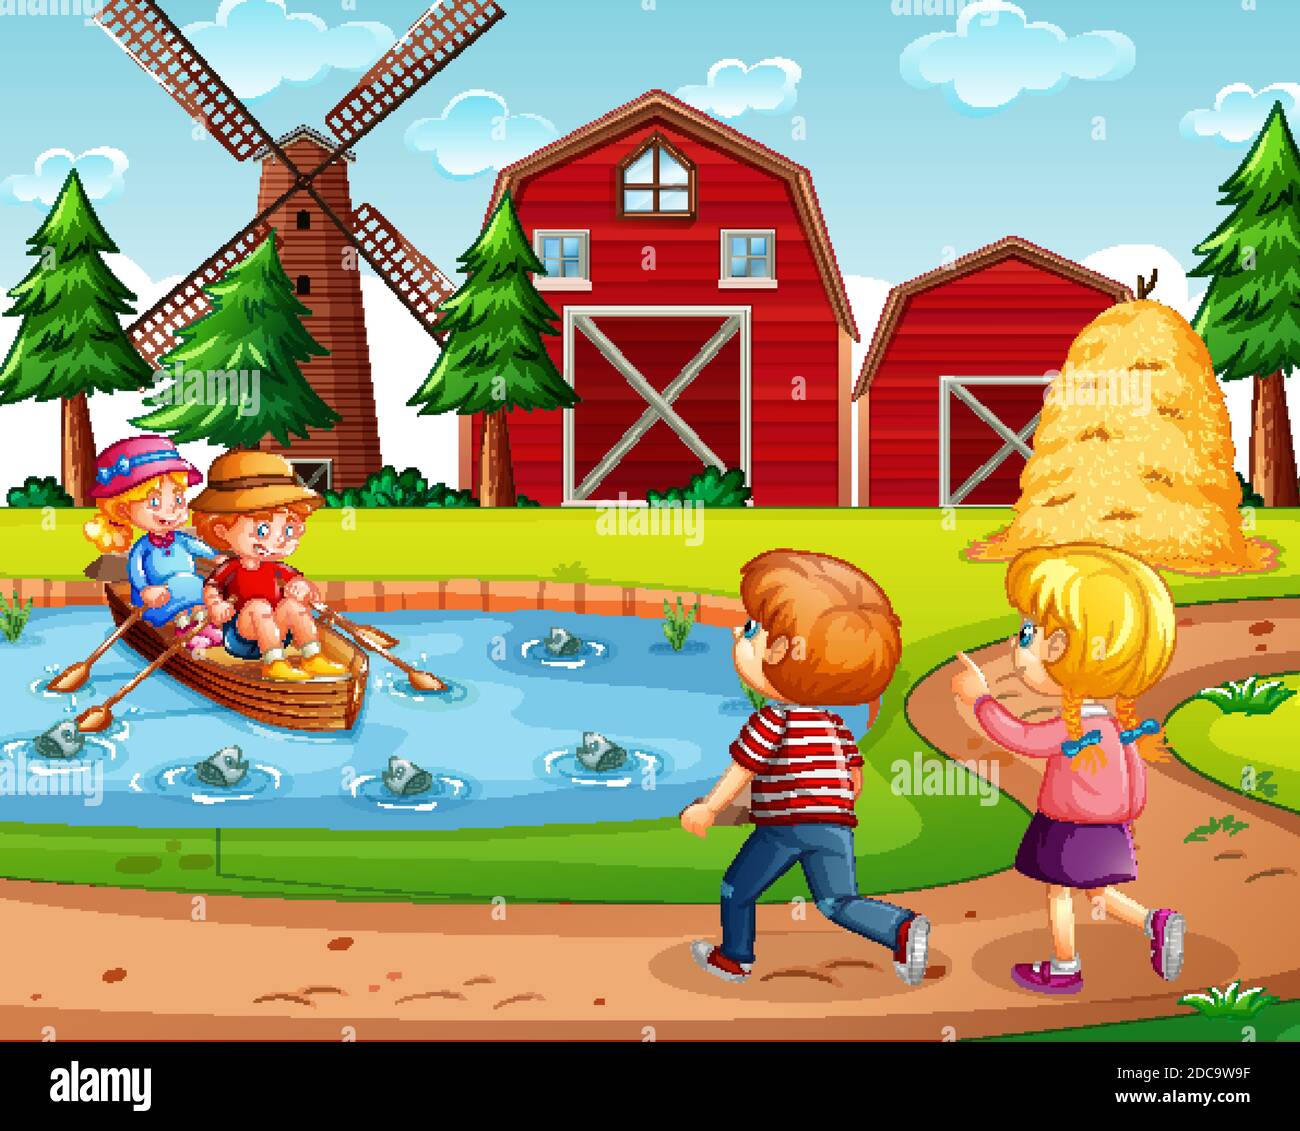 Four kids in the farm with red barn and windmill scene illustration Stock Vector